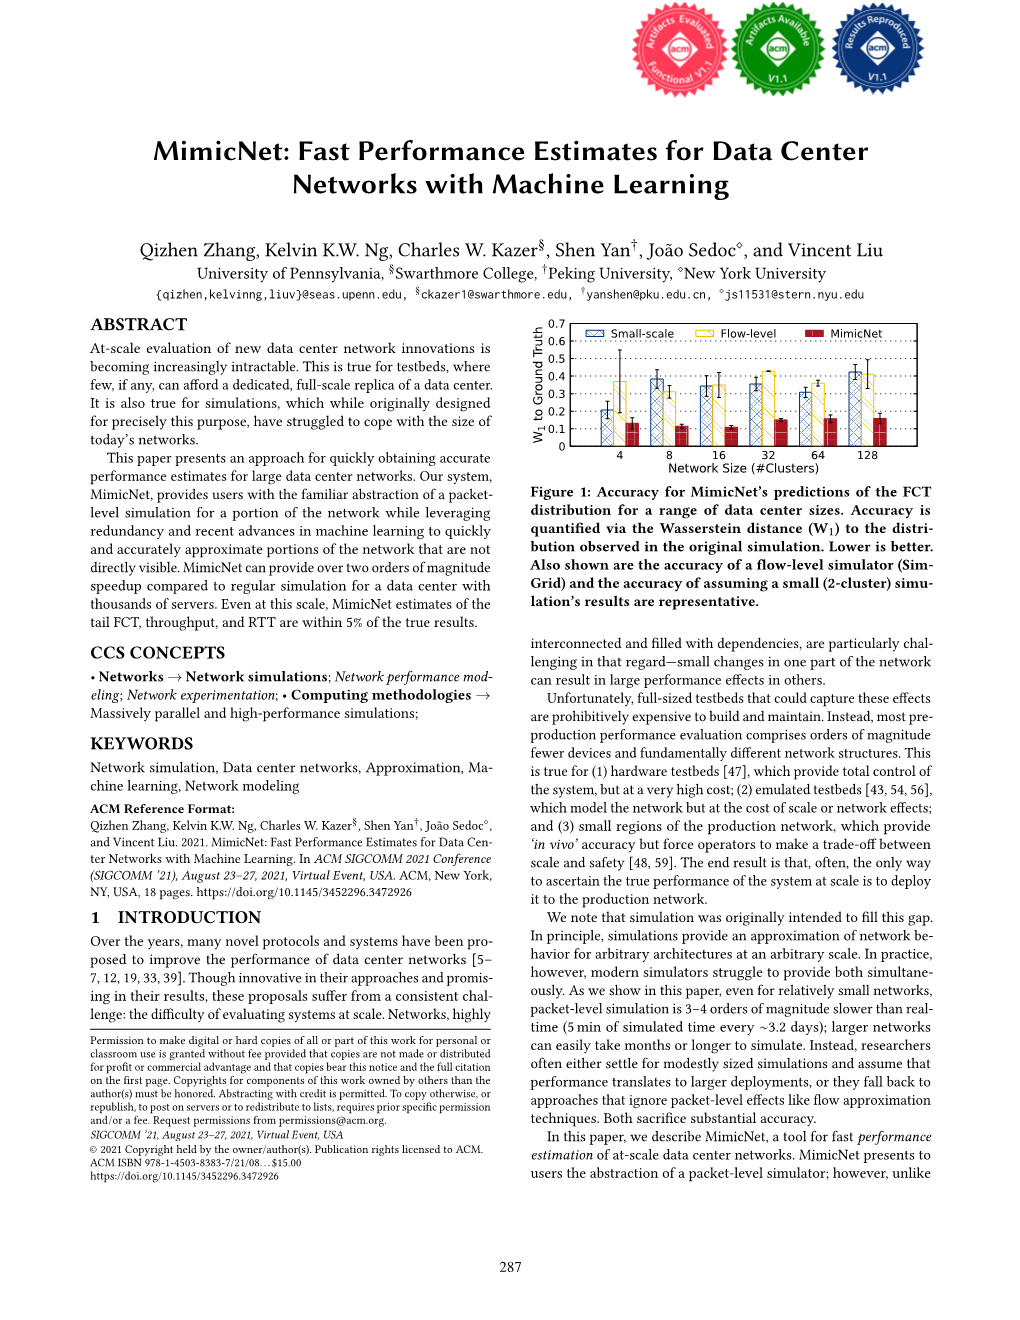 Fast Performance Estimates for Data Center Networks with Machine Learning